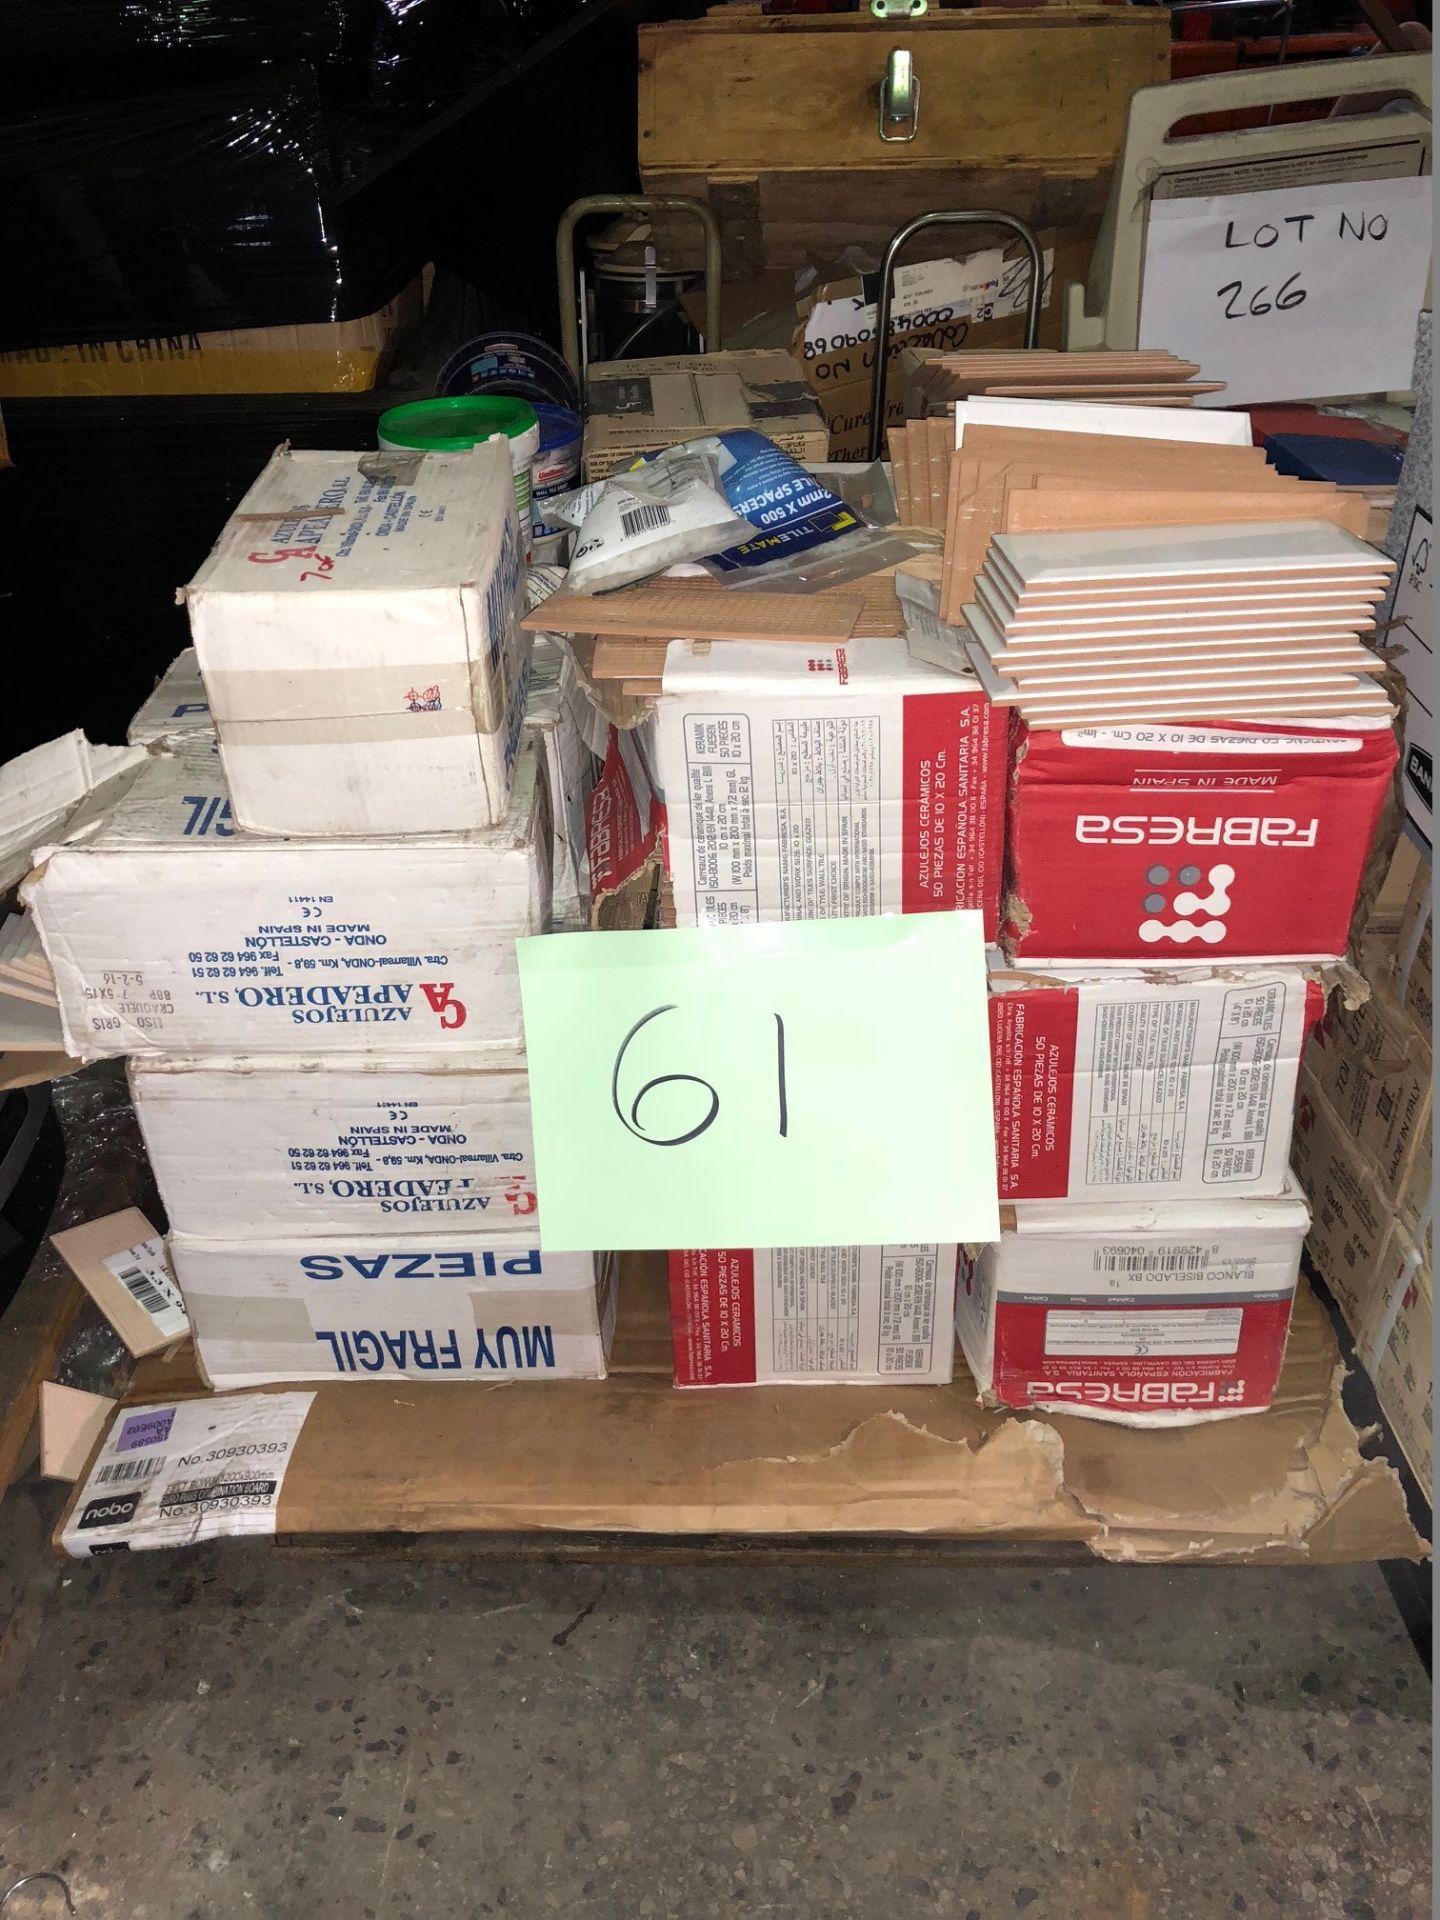 1 x Pallet of Mixed Wall Tiles (Approximately 40 Boxes in Total - Large Retail Value)